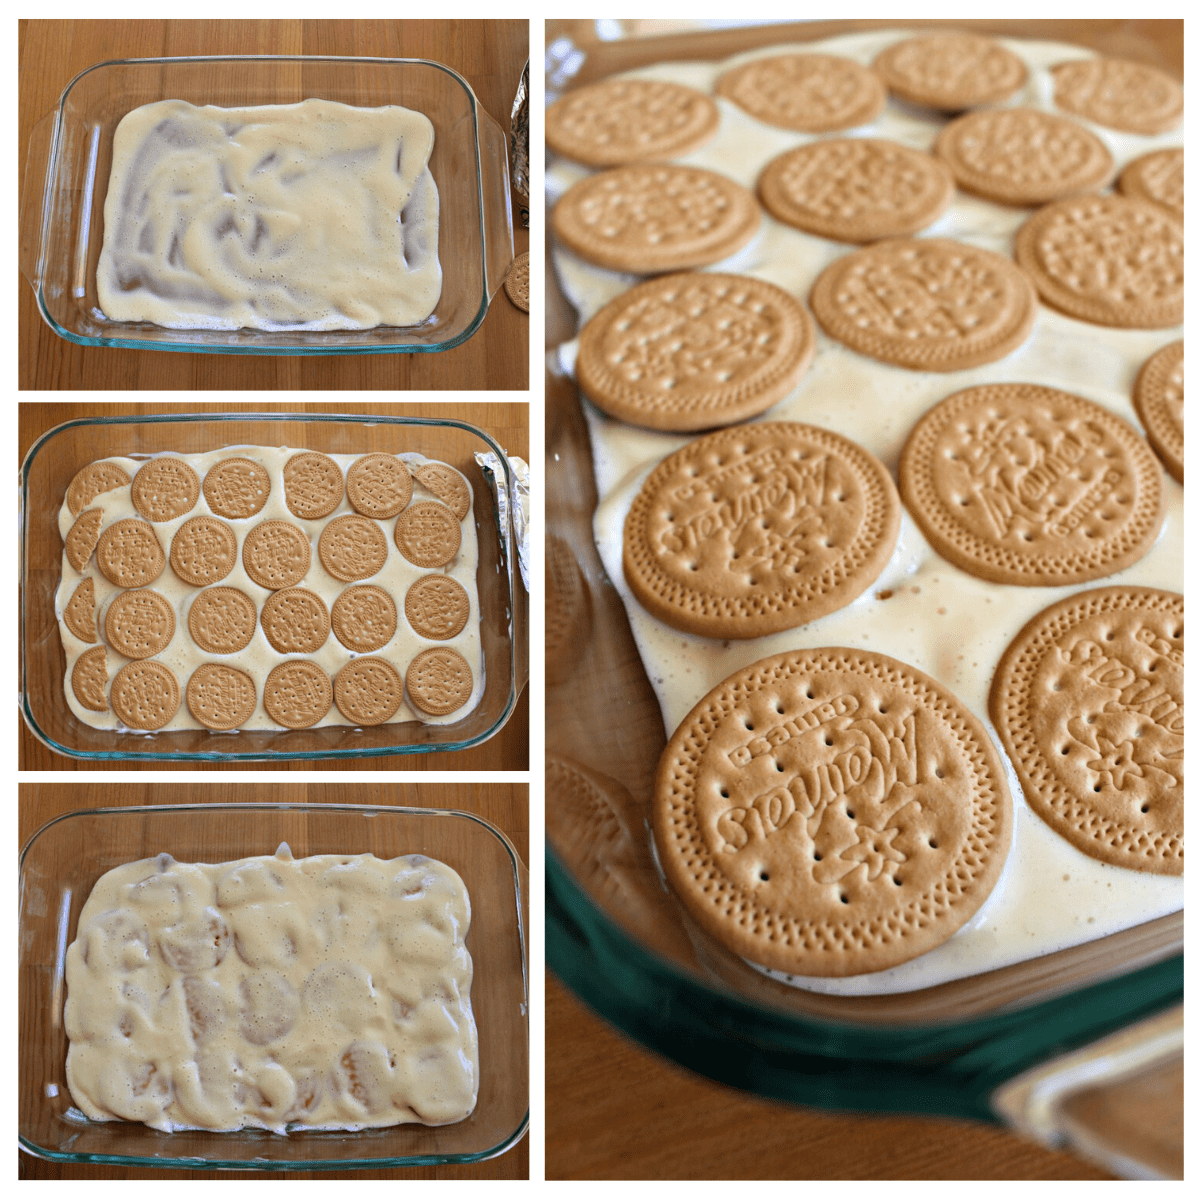 A collage showing how to layer the cookies and creamy mixture in a baking dish.